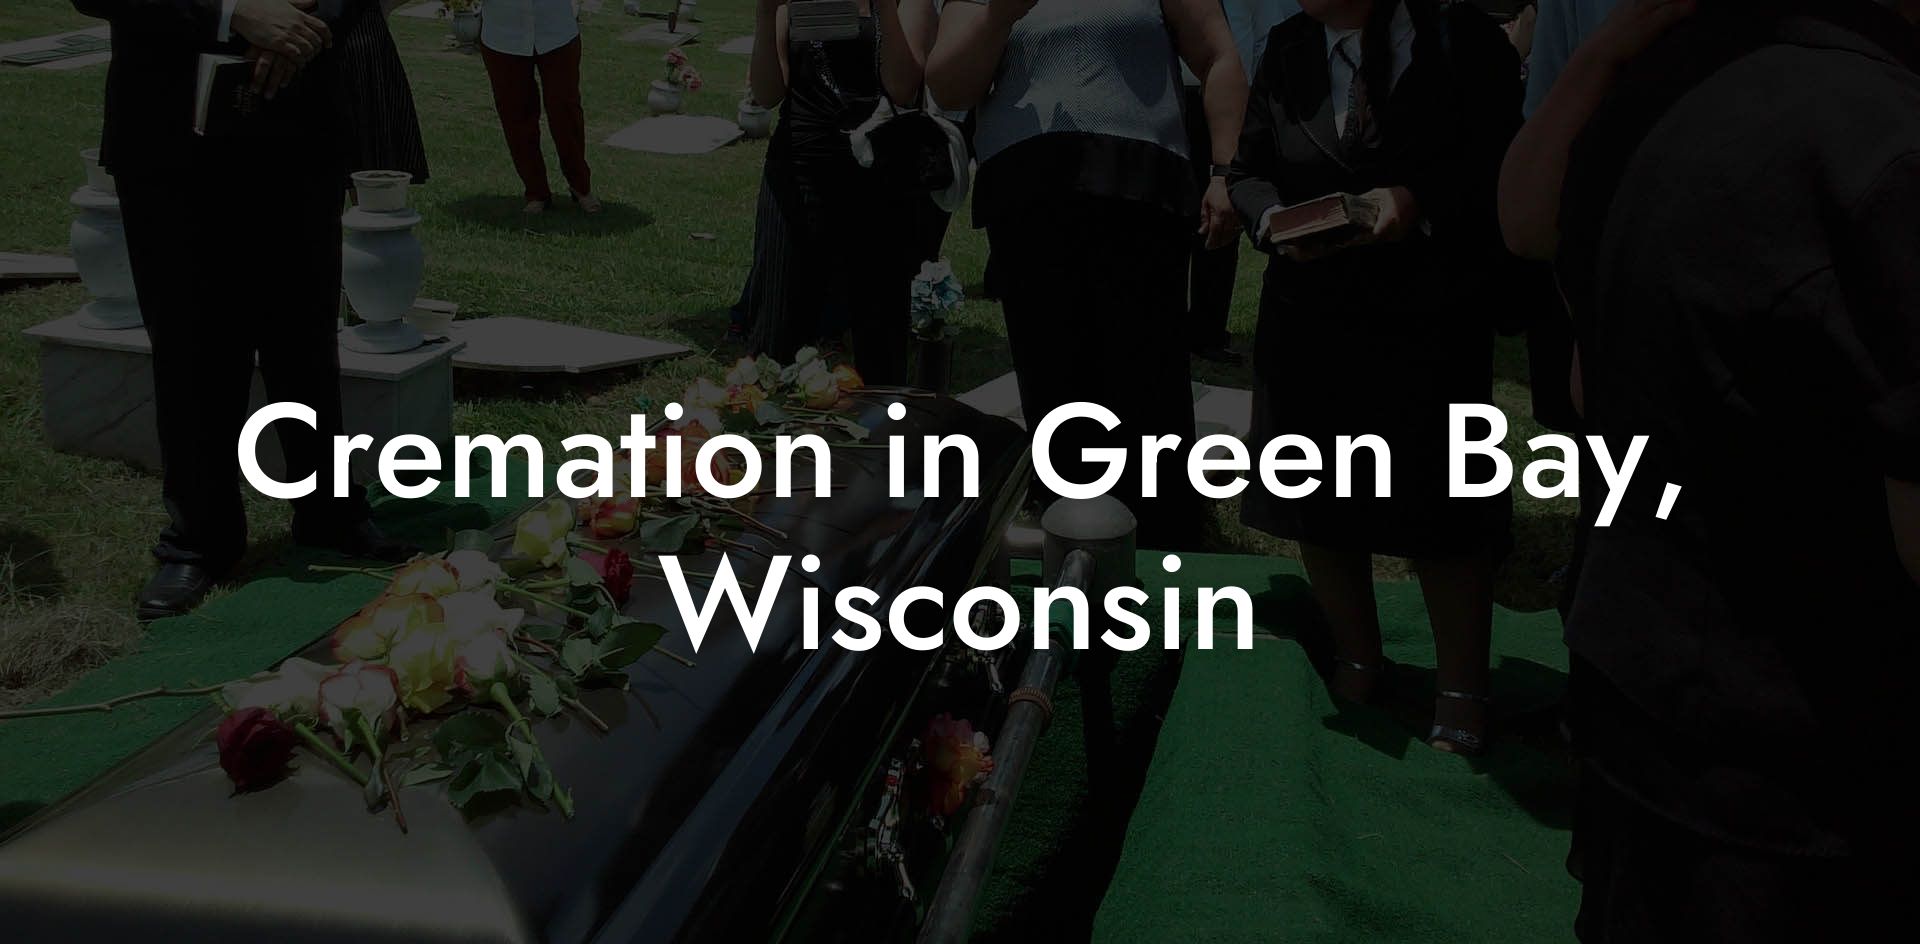 Cremation in Green Bay, Wisconsin